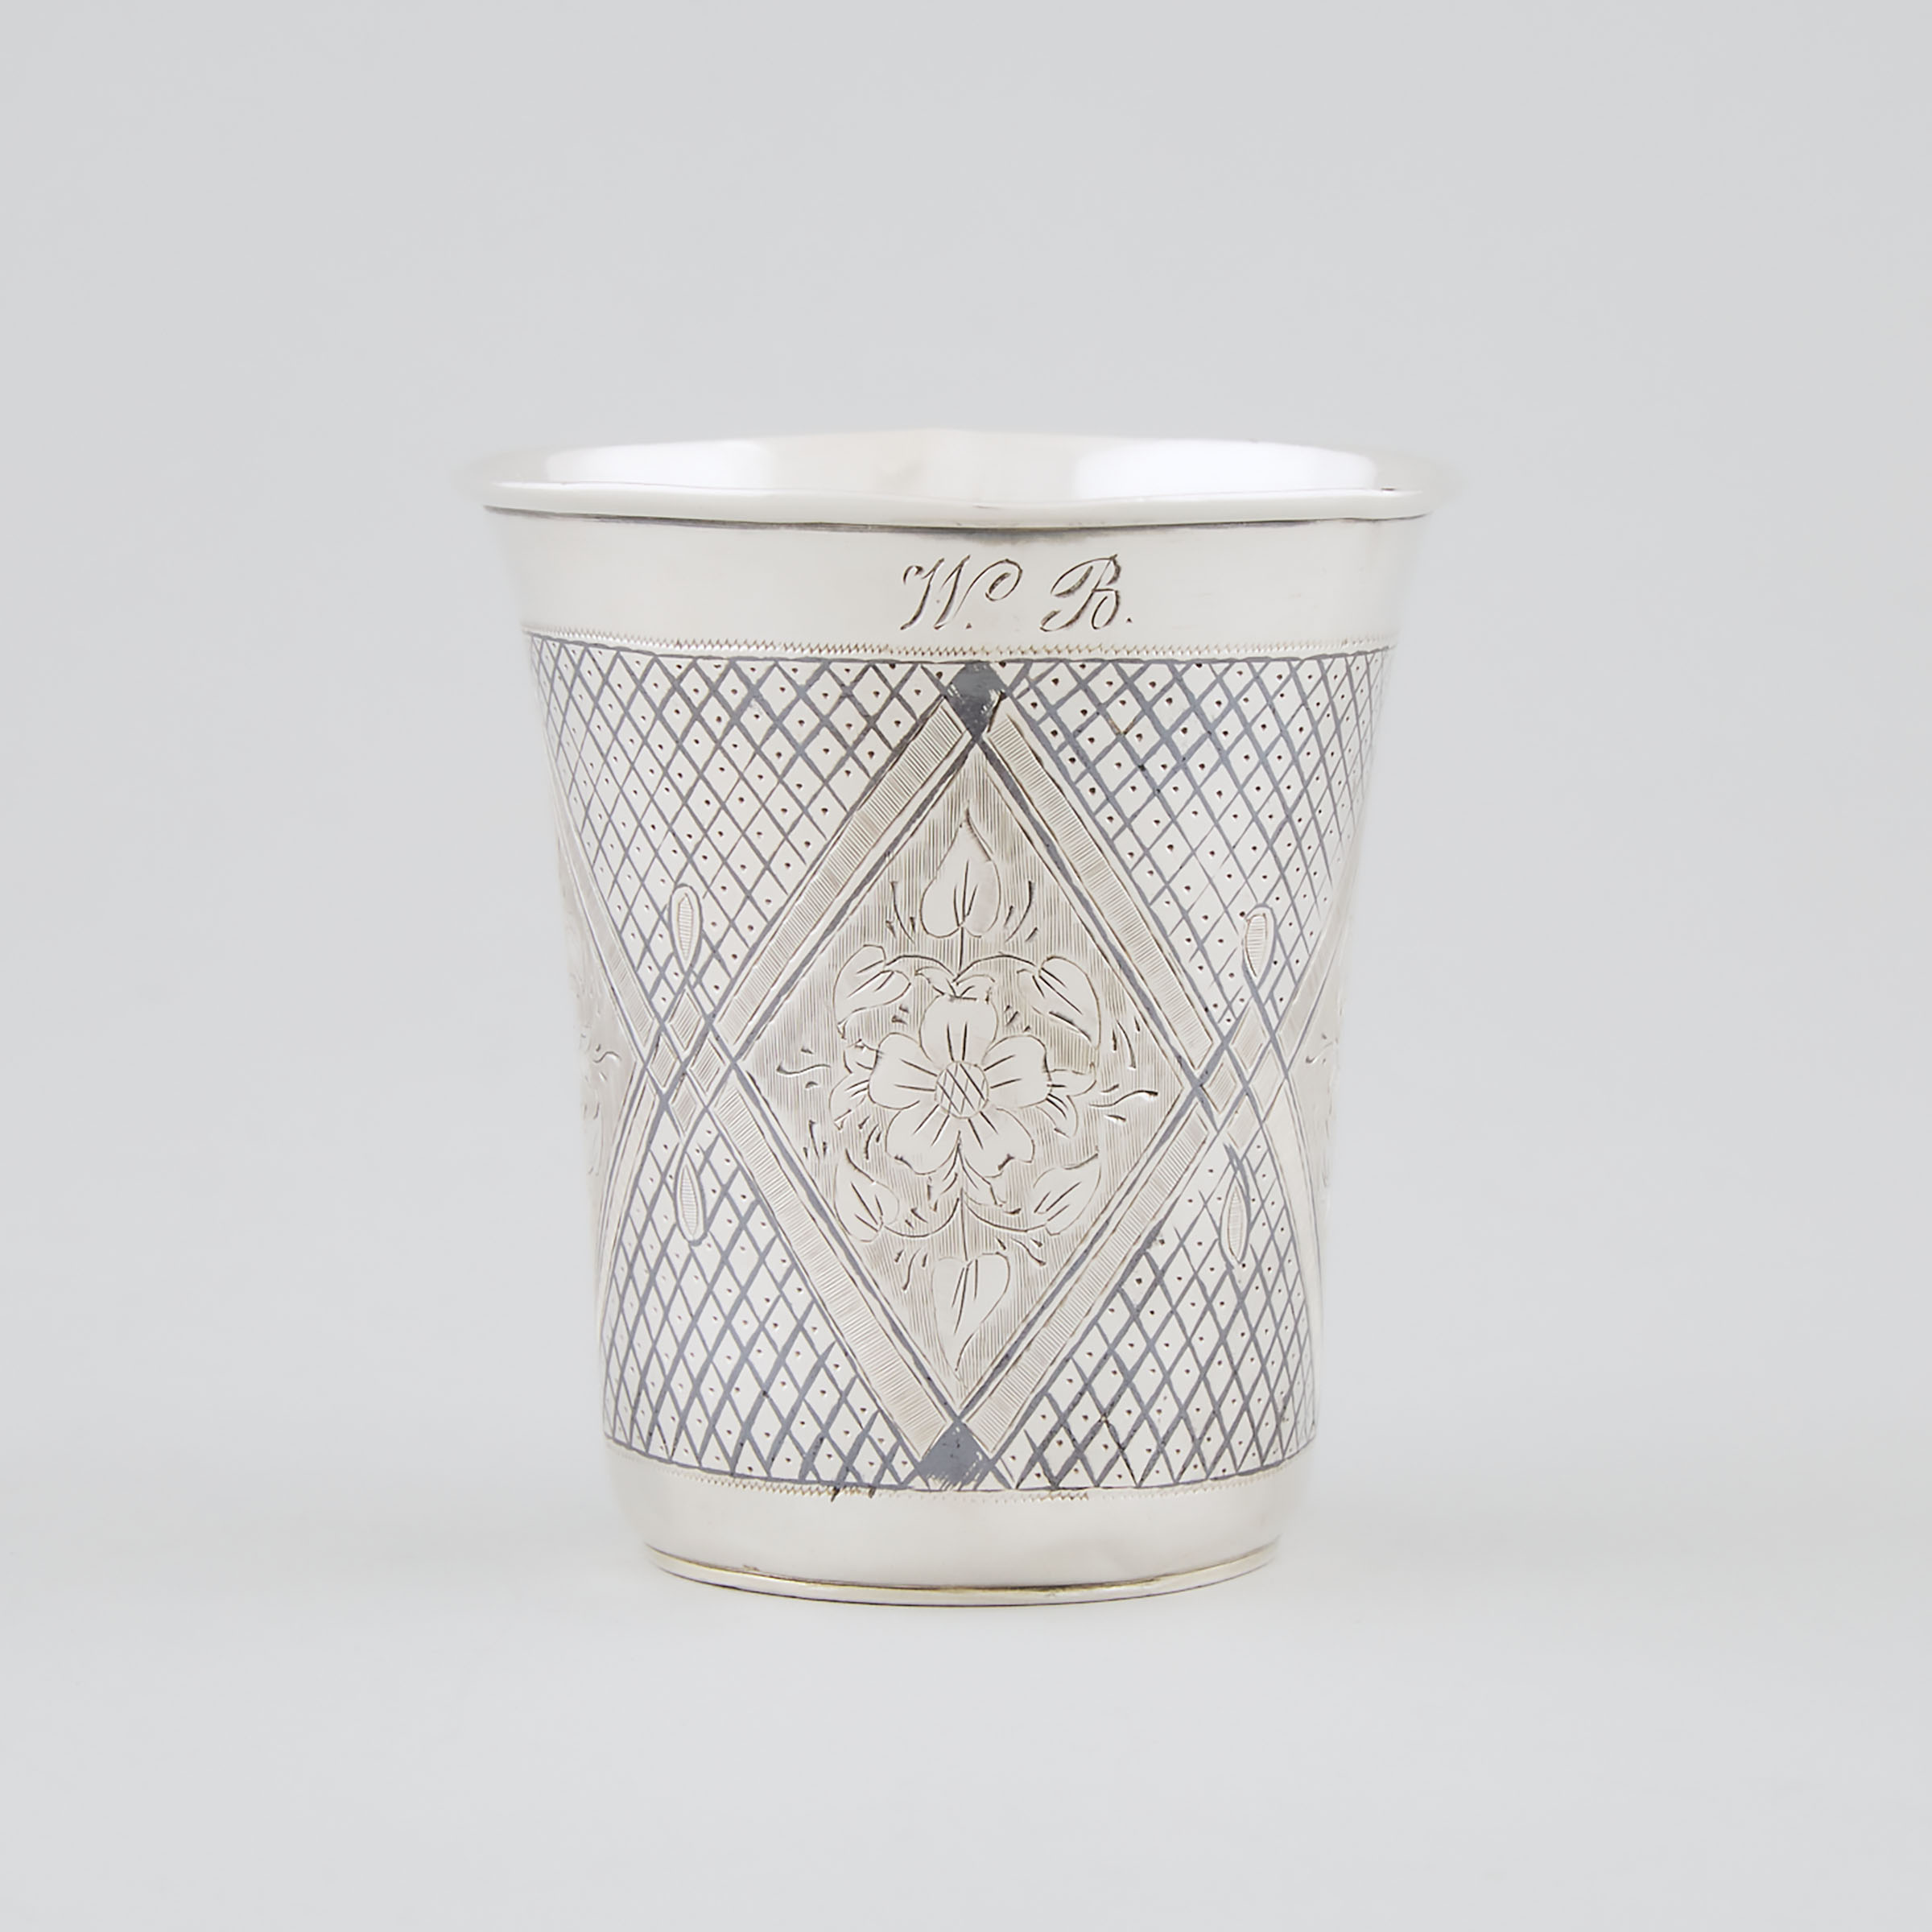 Russian Nielloed and Engraved Silver Beaker, M. Dmitriyev, Moscow, 1865